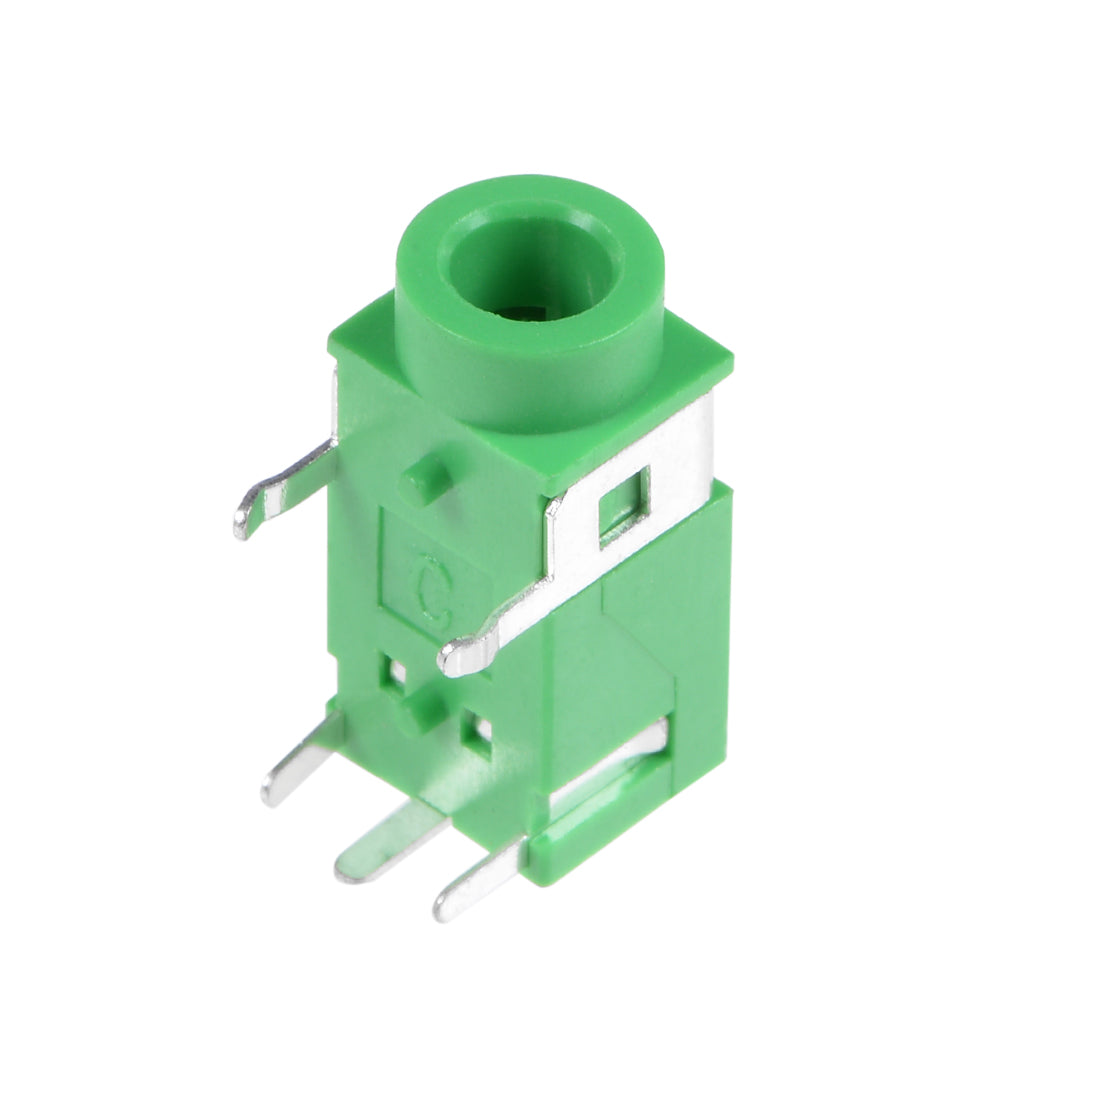 uxcell Uxcell 5Pcs PCB Mount 3.5mm 5 Pin Socket Headphone Stereo Jack Audio Video Connector Green PJ322